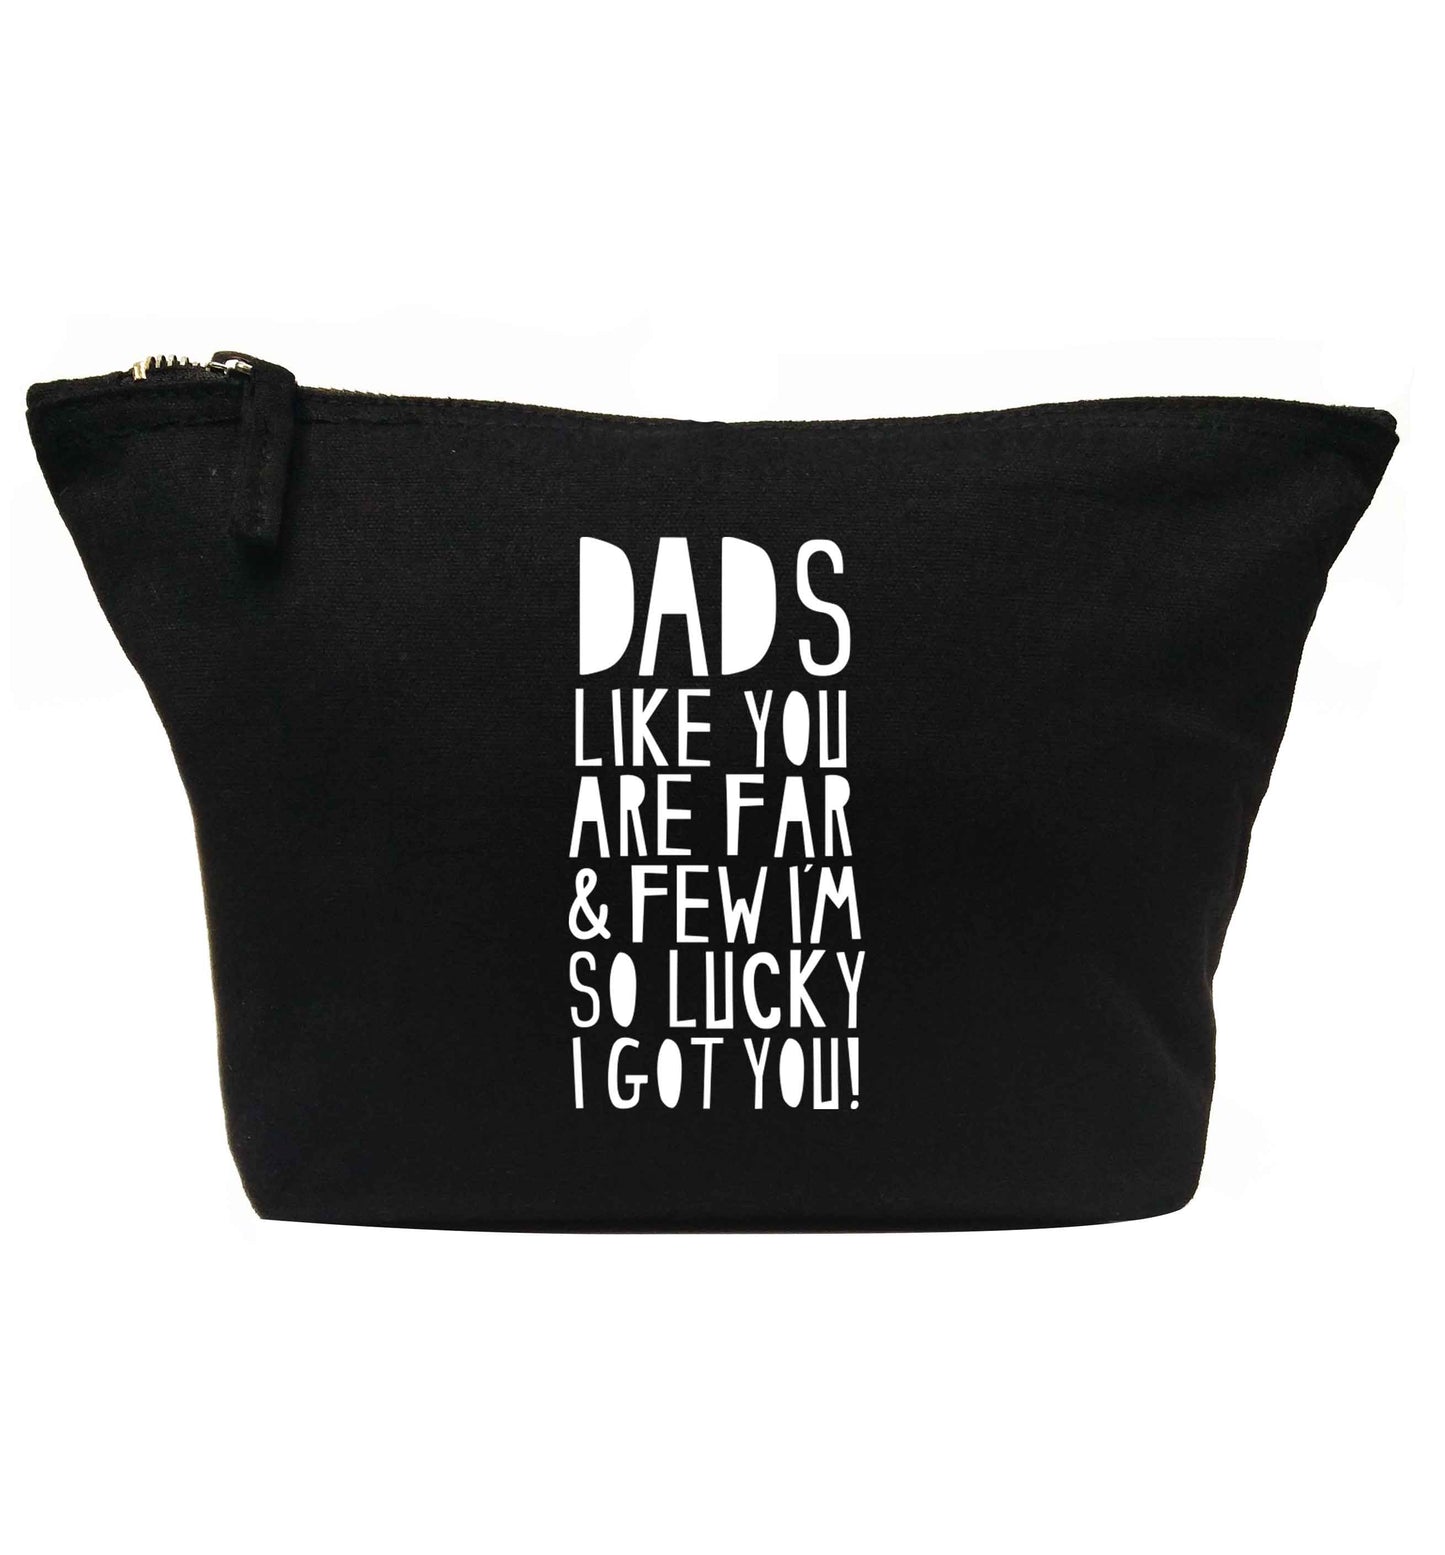 Dads like you are far and few I'm so luck I got you! | Makeup / wash bag